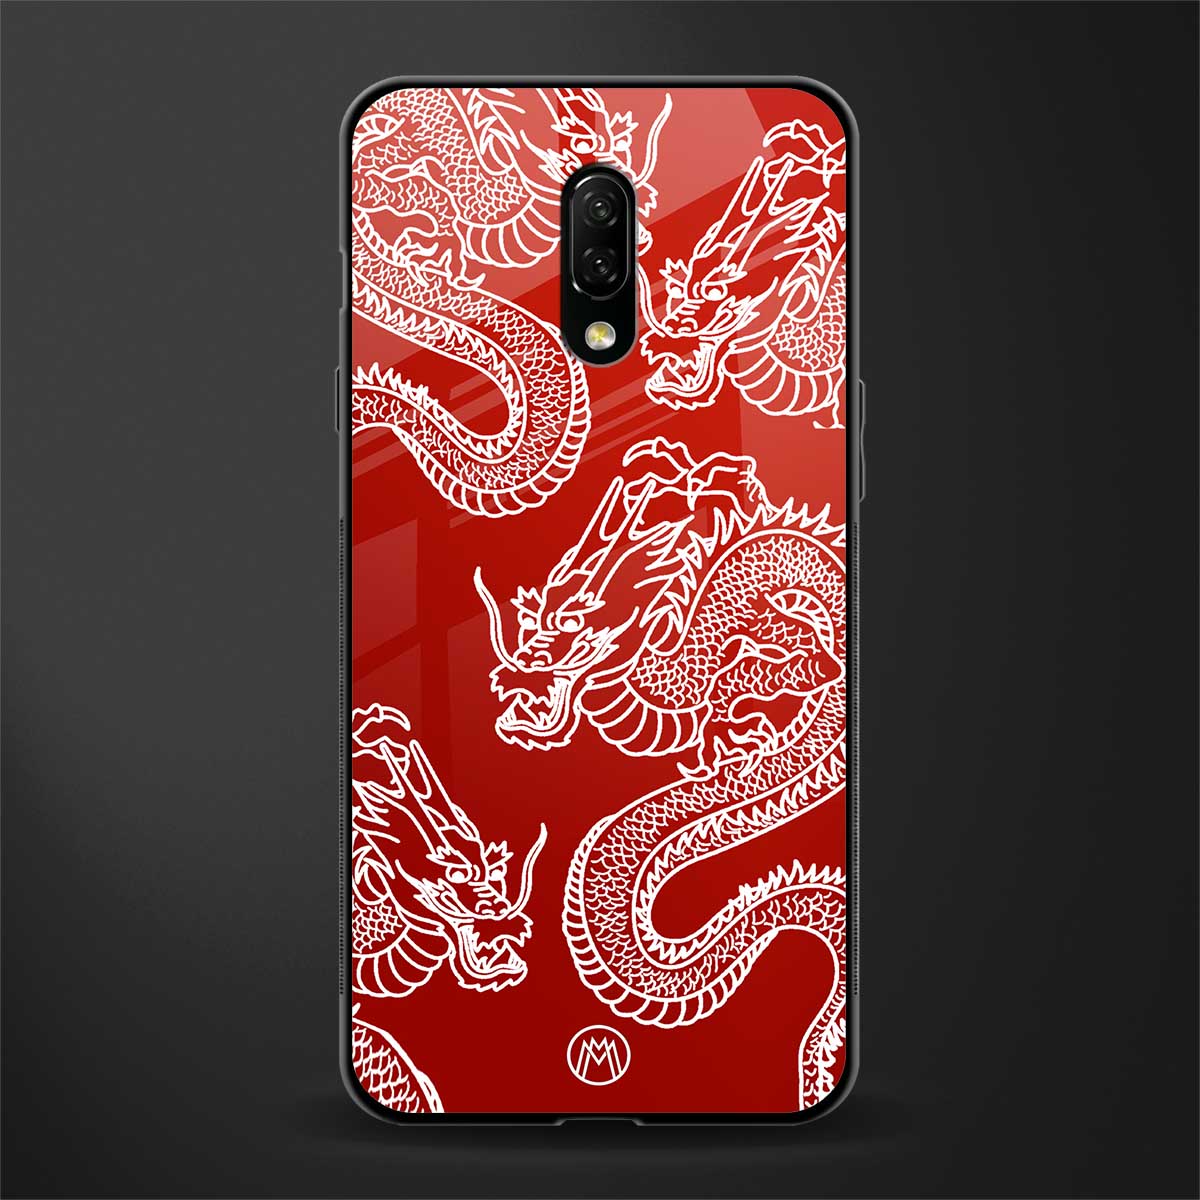 dragons red glass case for oneplus 7 image